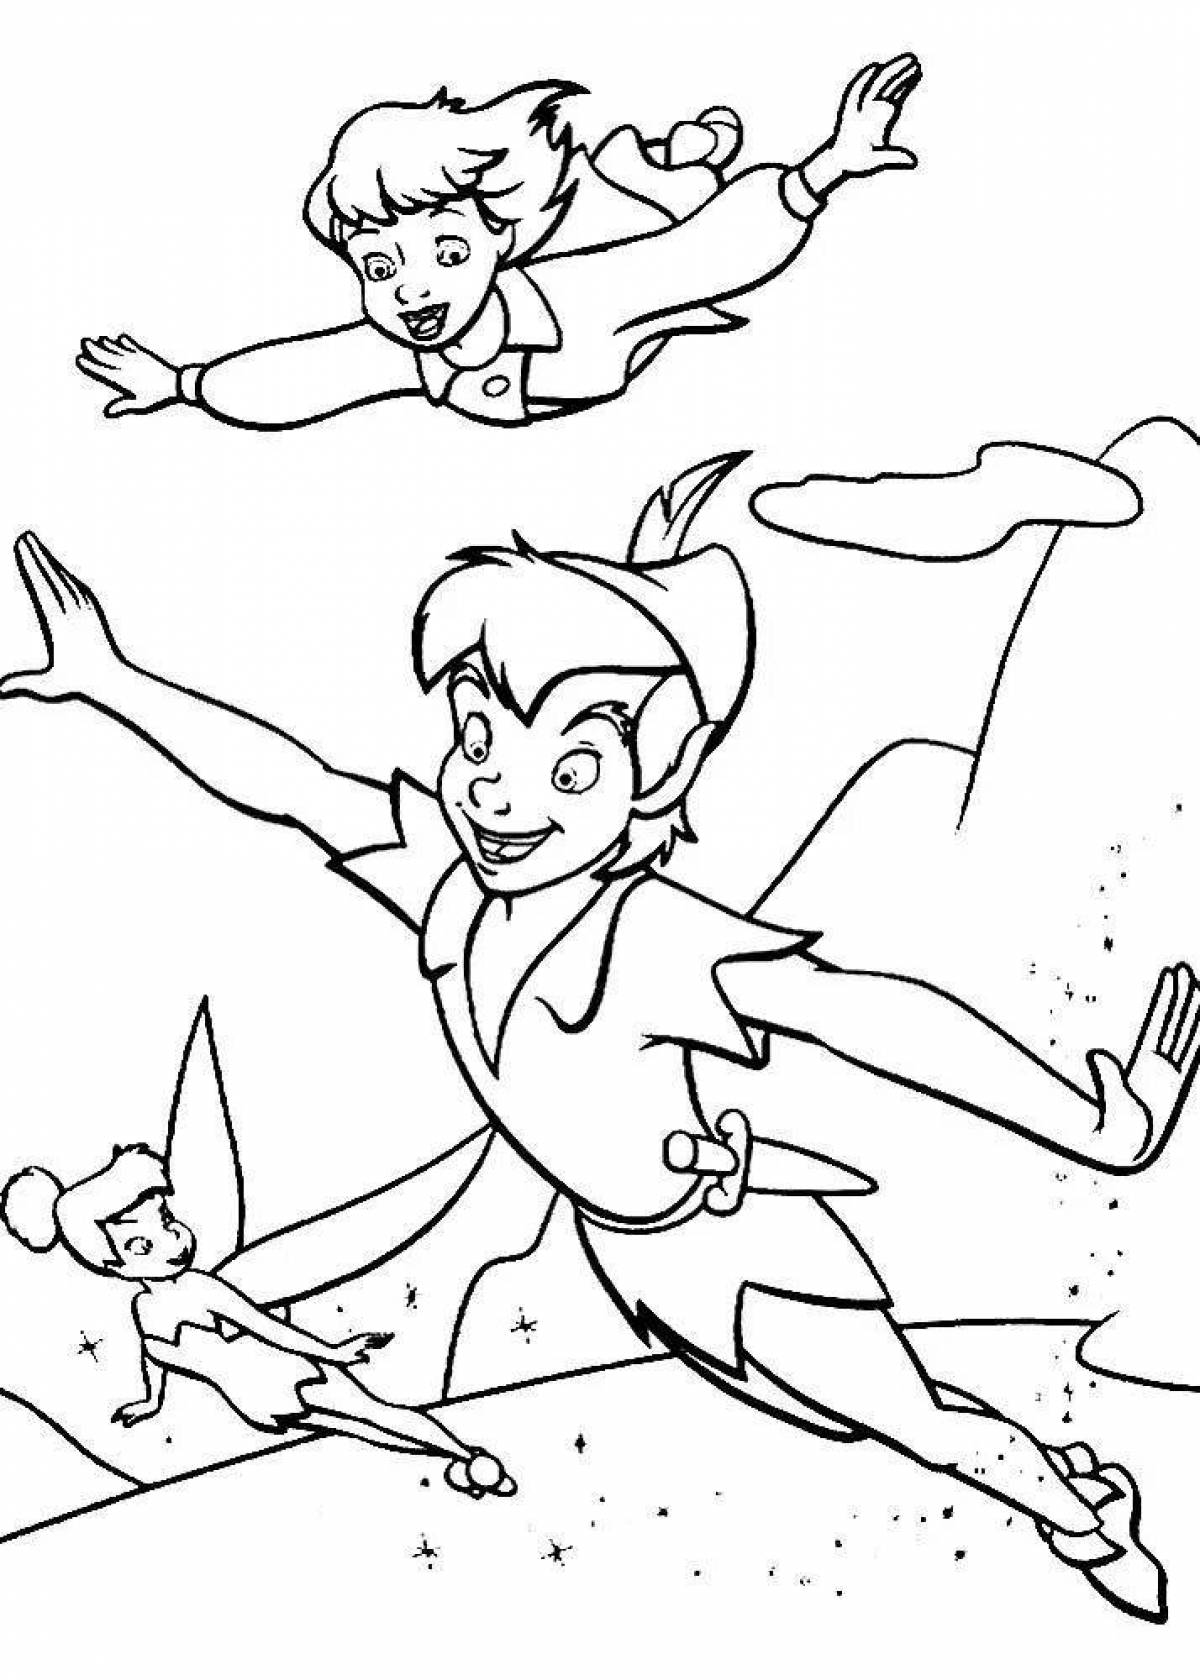 Coloring page magical peter pan